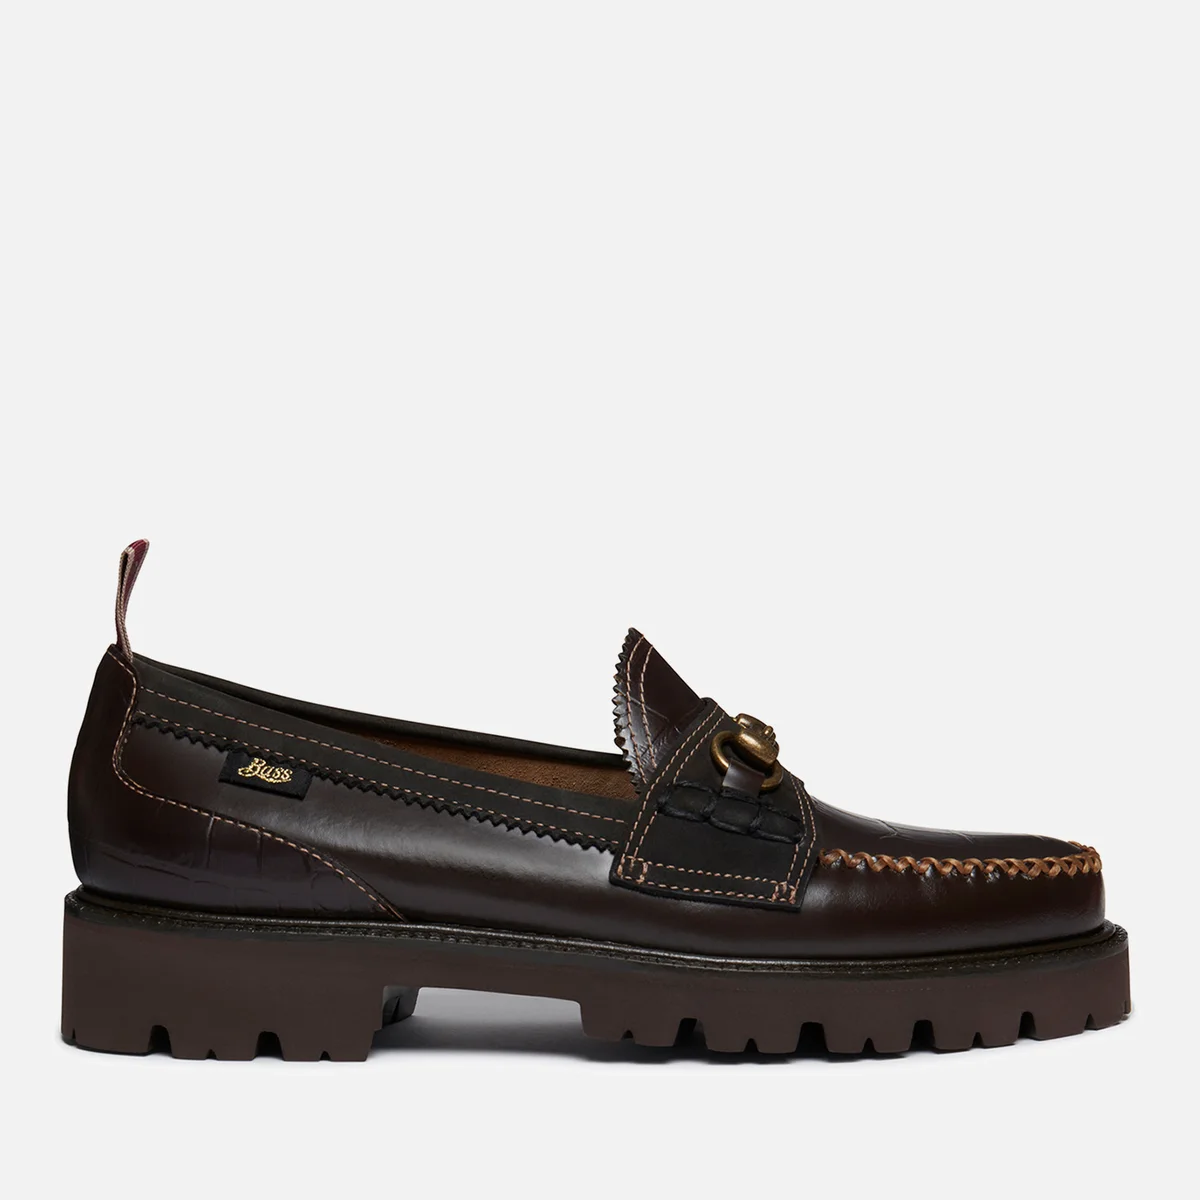 G.H Bass & Co x Nicholas Daley Men's Super Lug Lincoln Leather Loafers Image 1